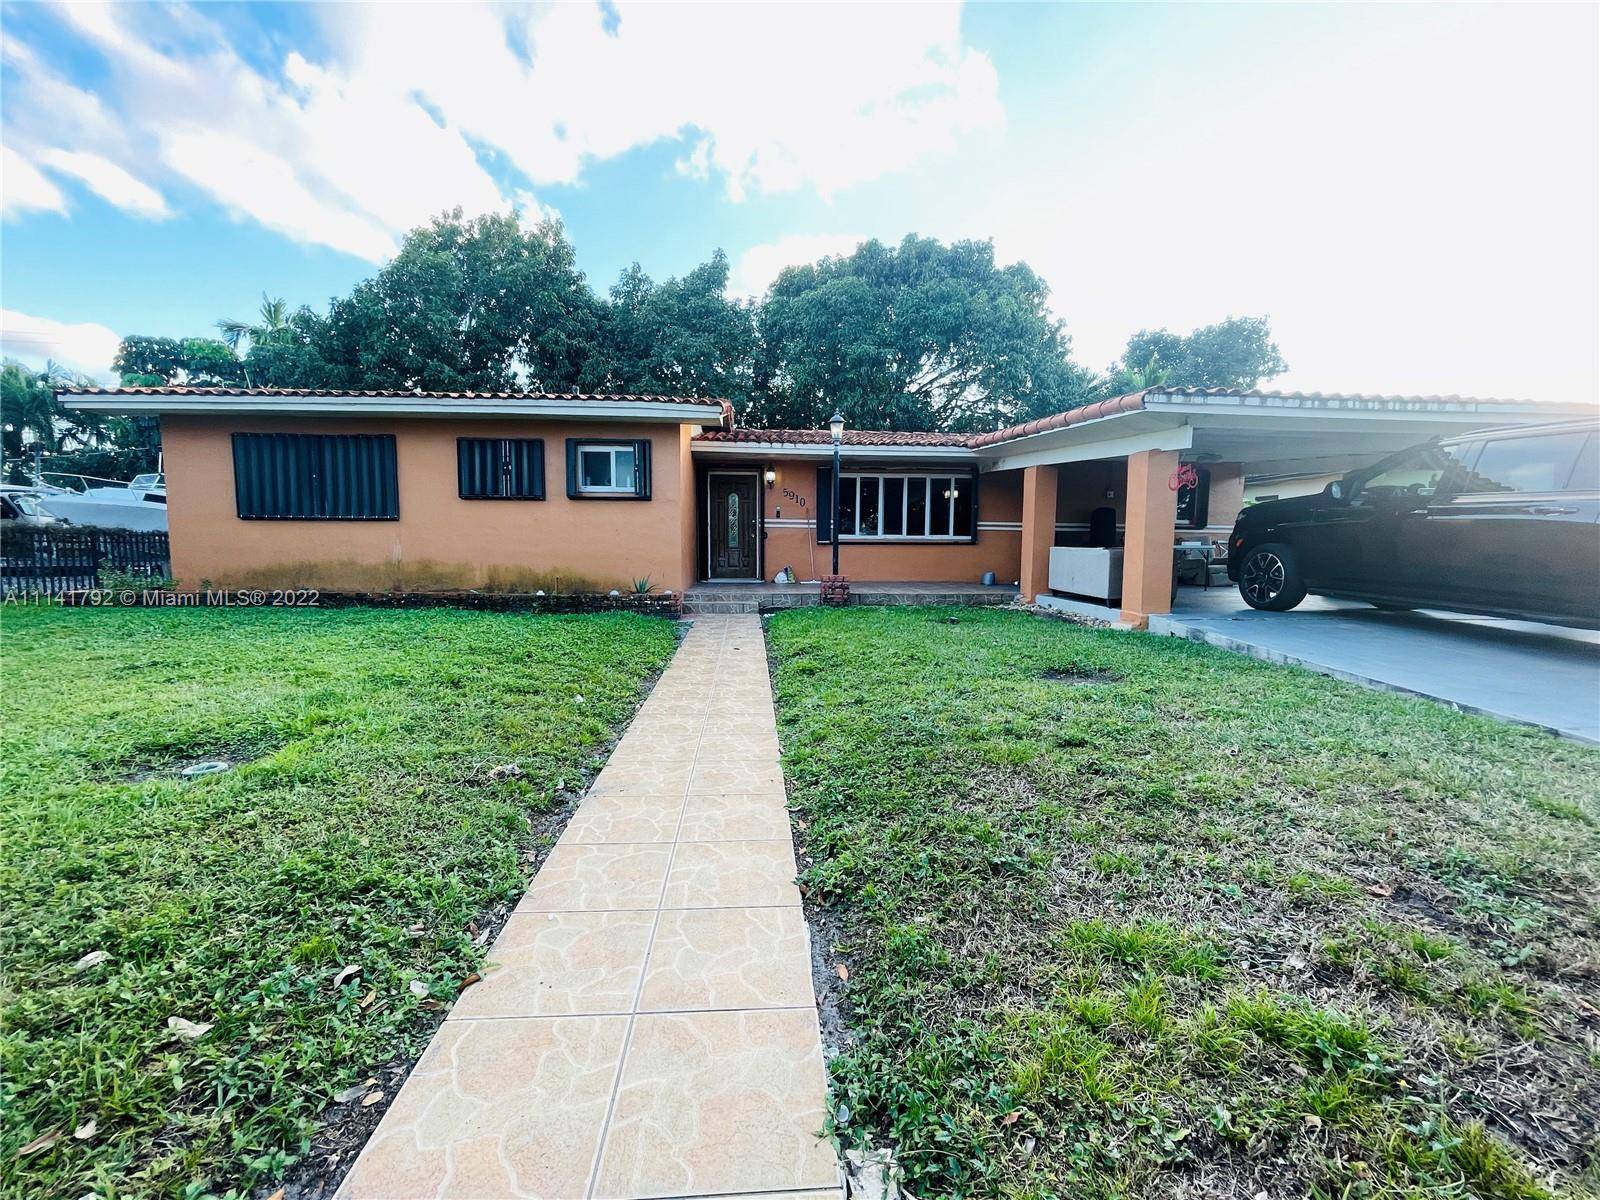 Great opportunity to own this Spacious single family home in desired Hialeah neighborhood.